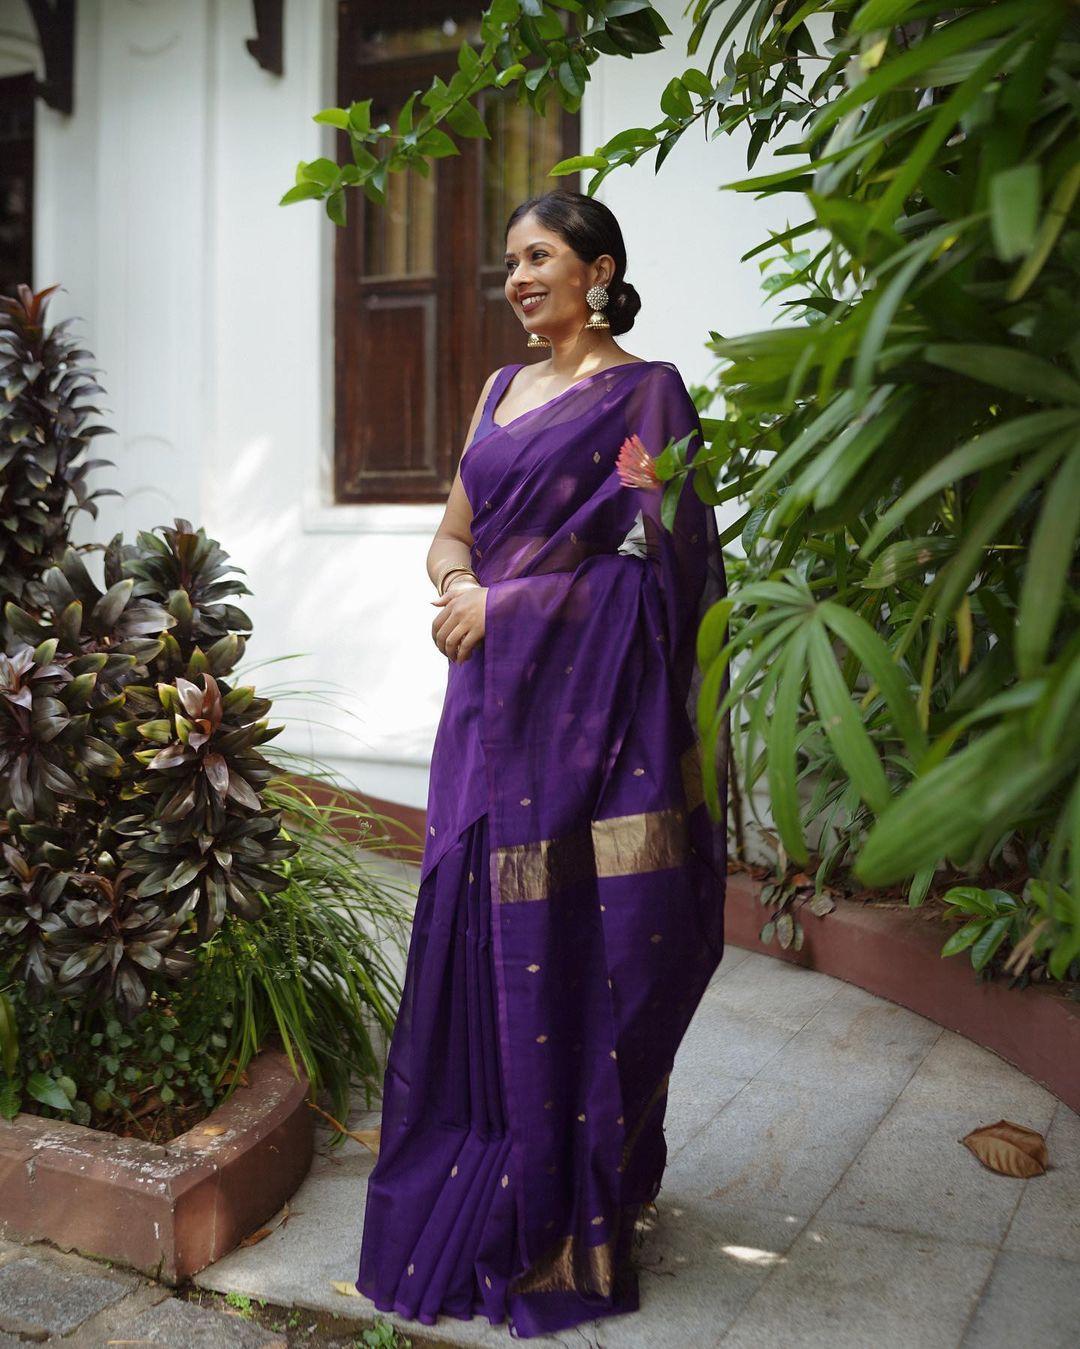 Image of Indian traditional Beautiful Woman Wearing an traditional Saree  And Posing On The Outdoor With a Smile Face-LS682959-Picxy